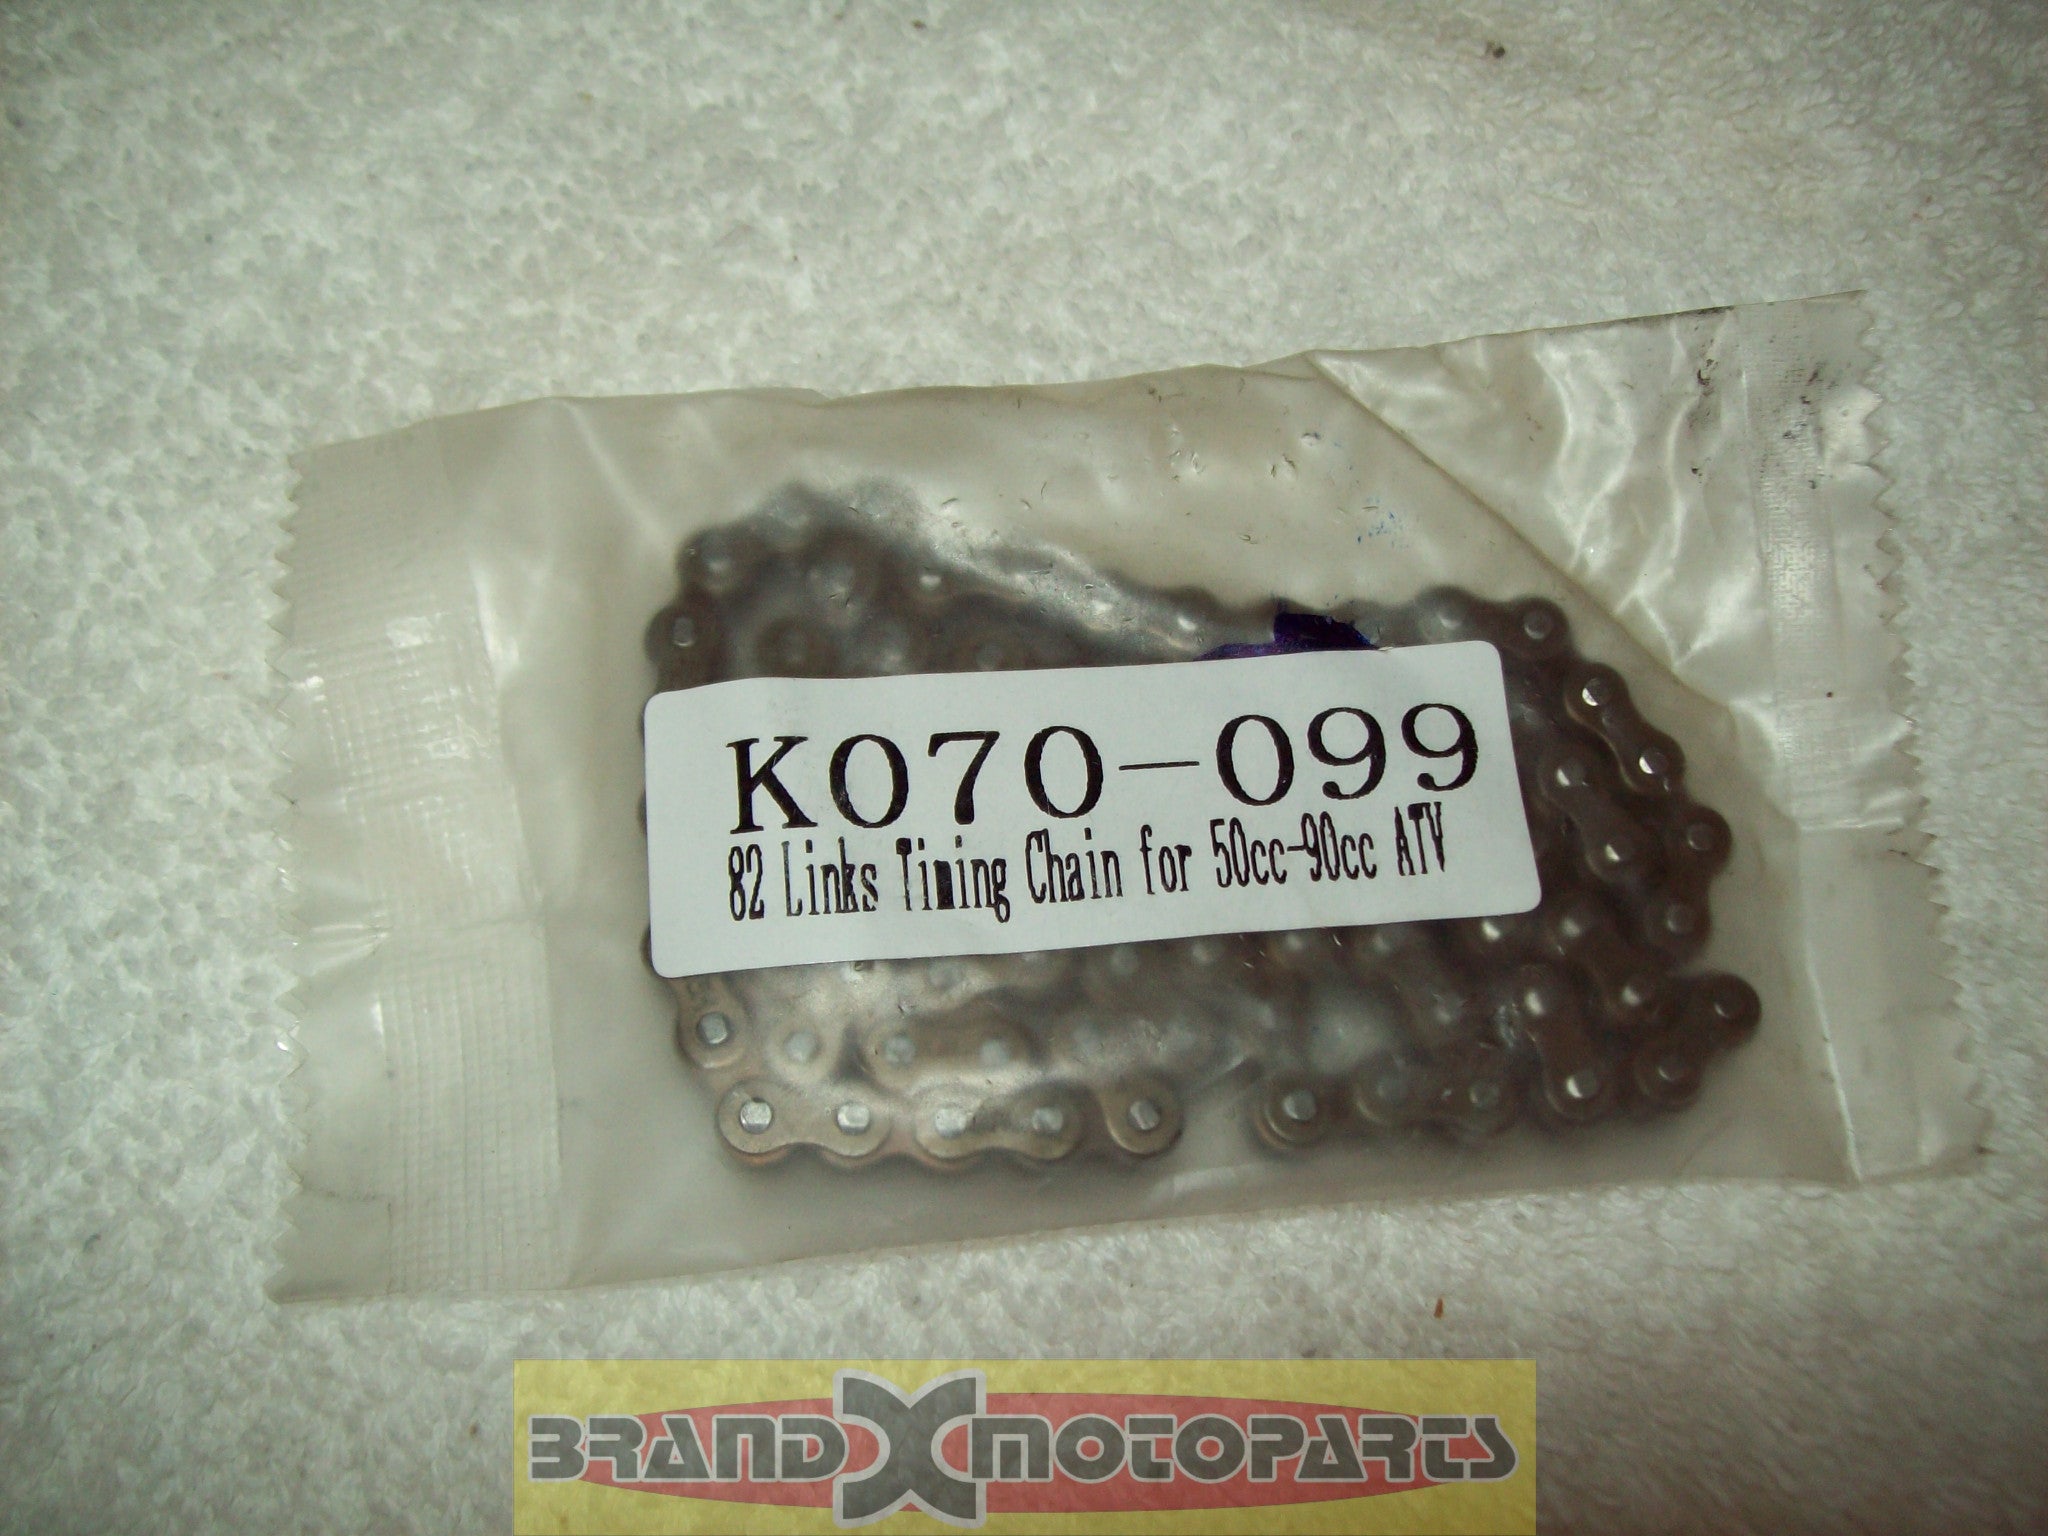 82 Link Timing/Cam Chain for 50cc-90cc